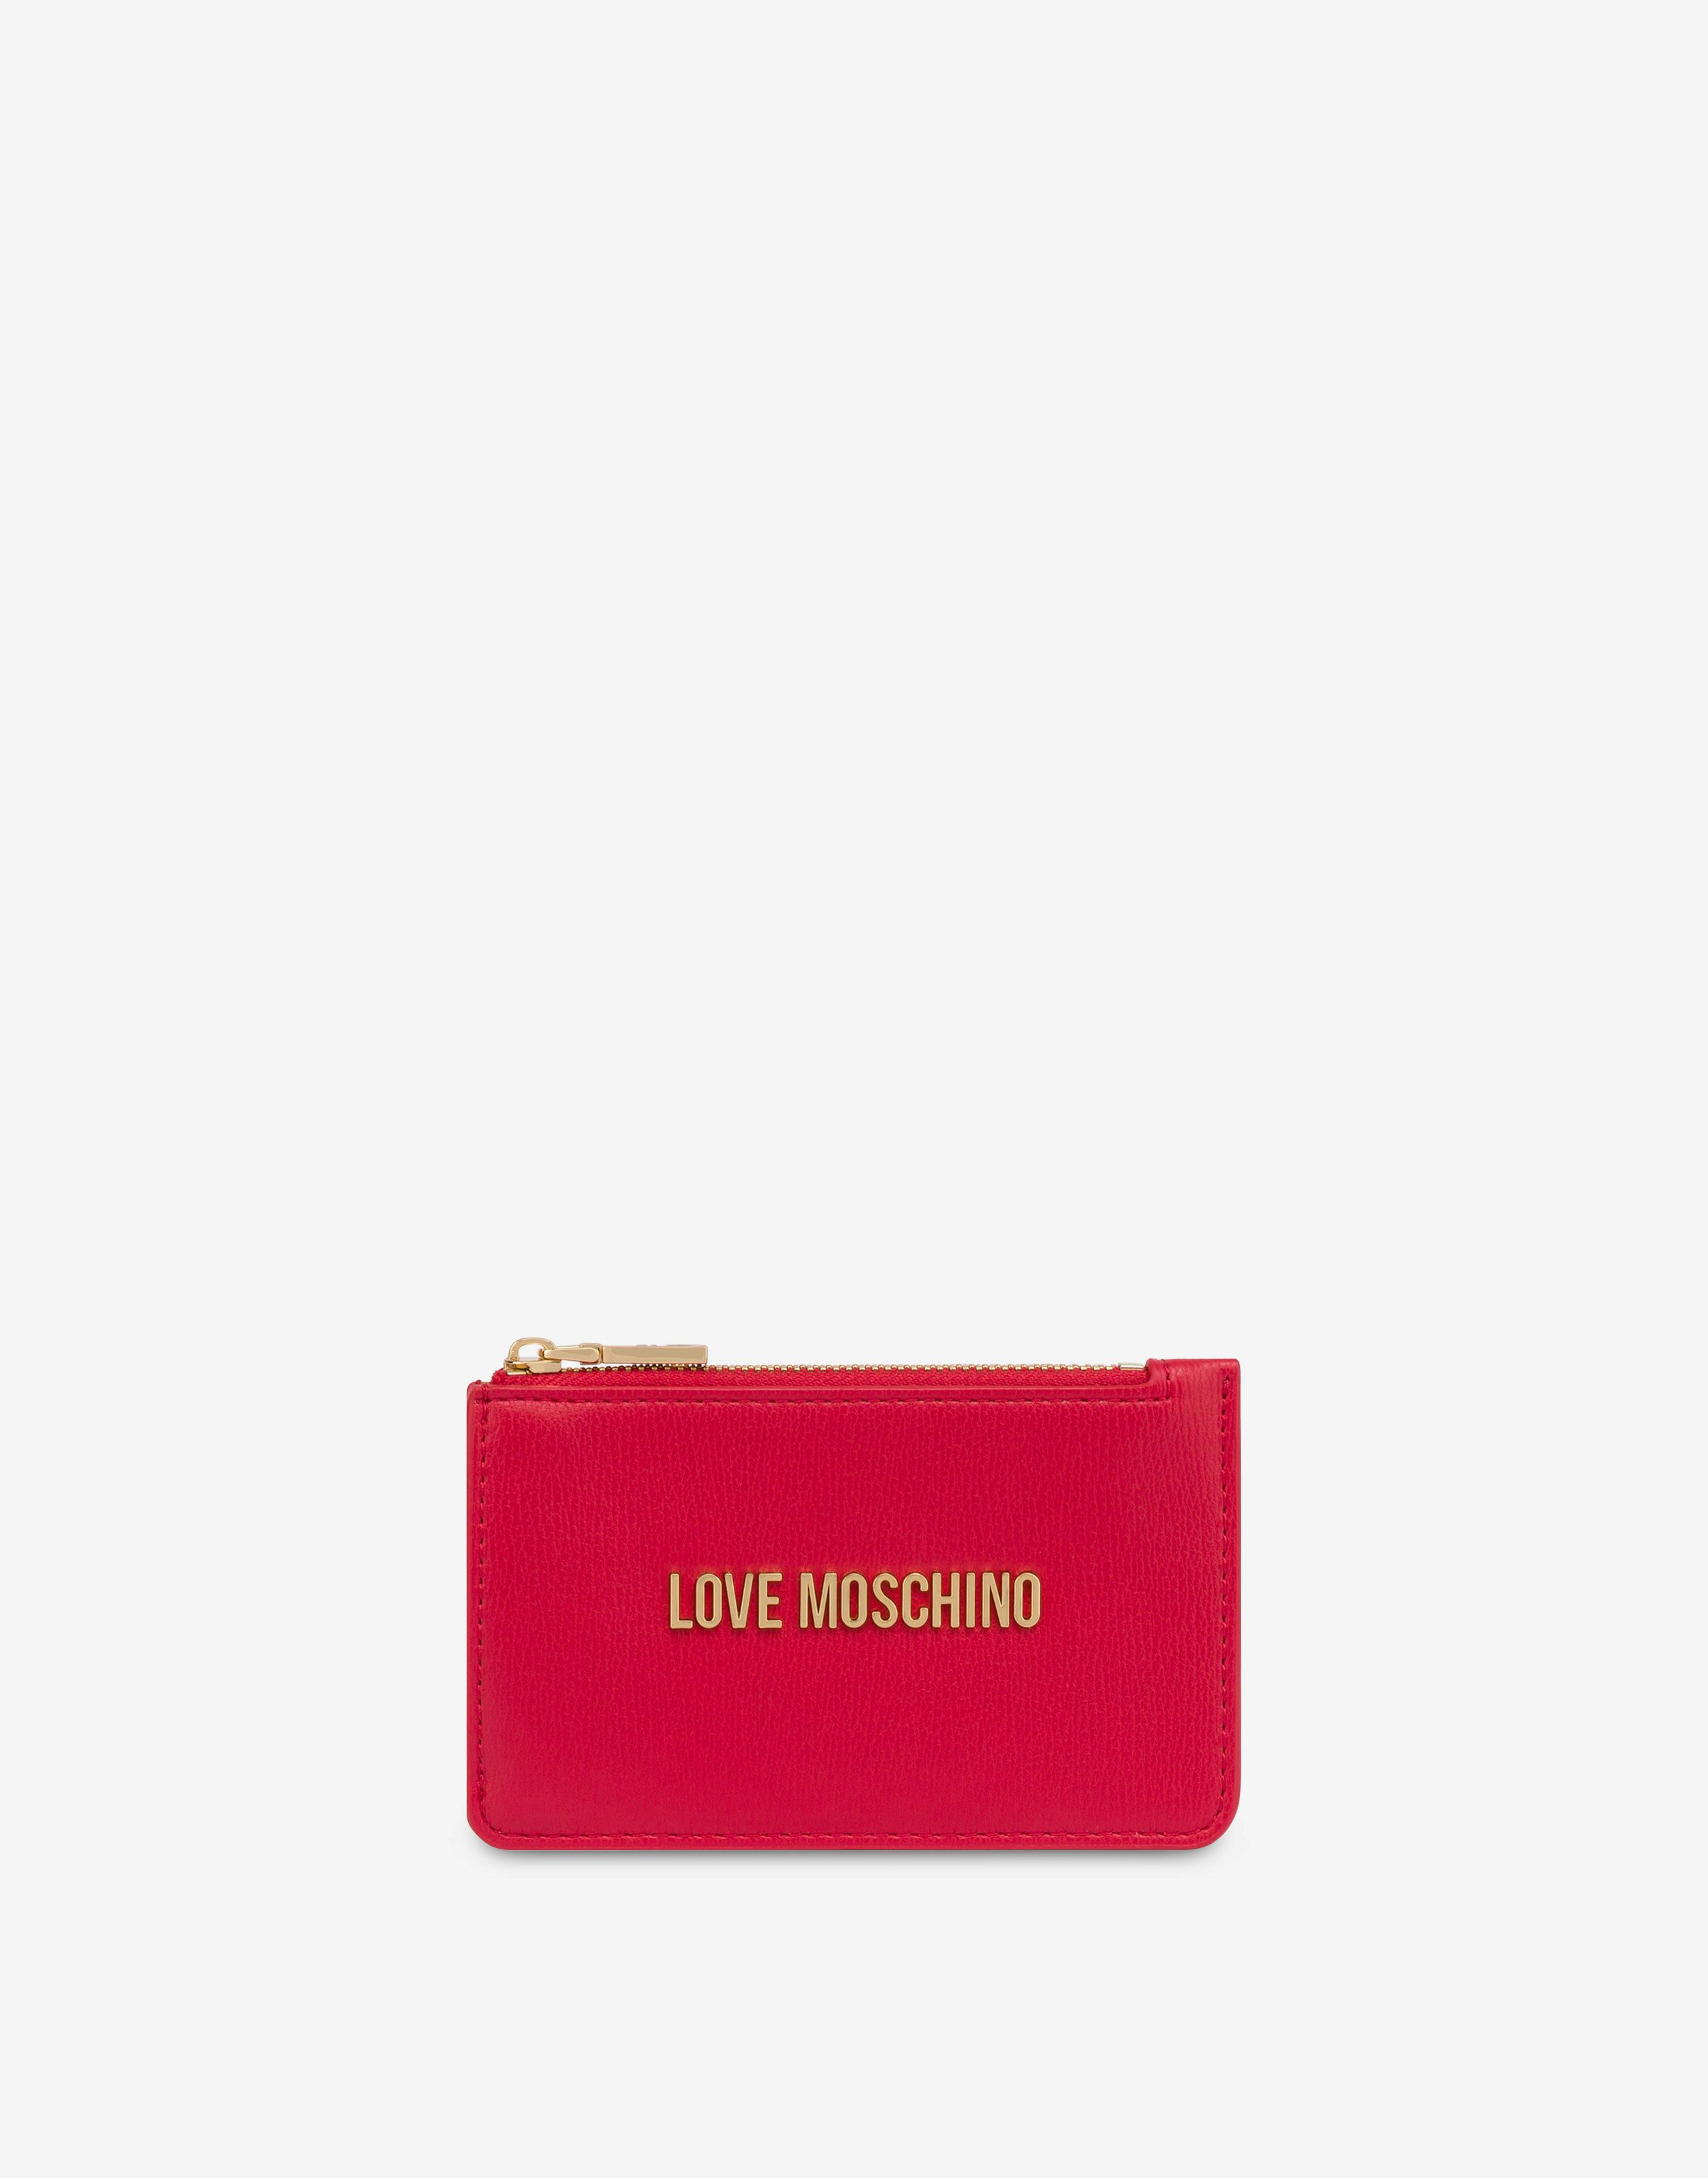 Love Moschino 財布 for レディース - Official Store